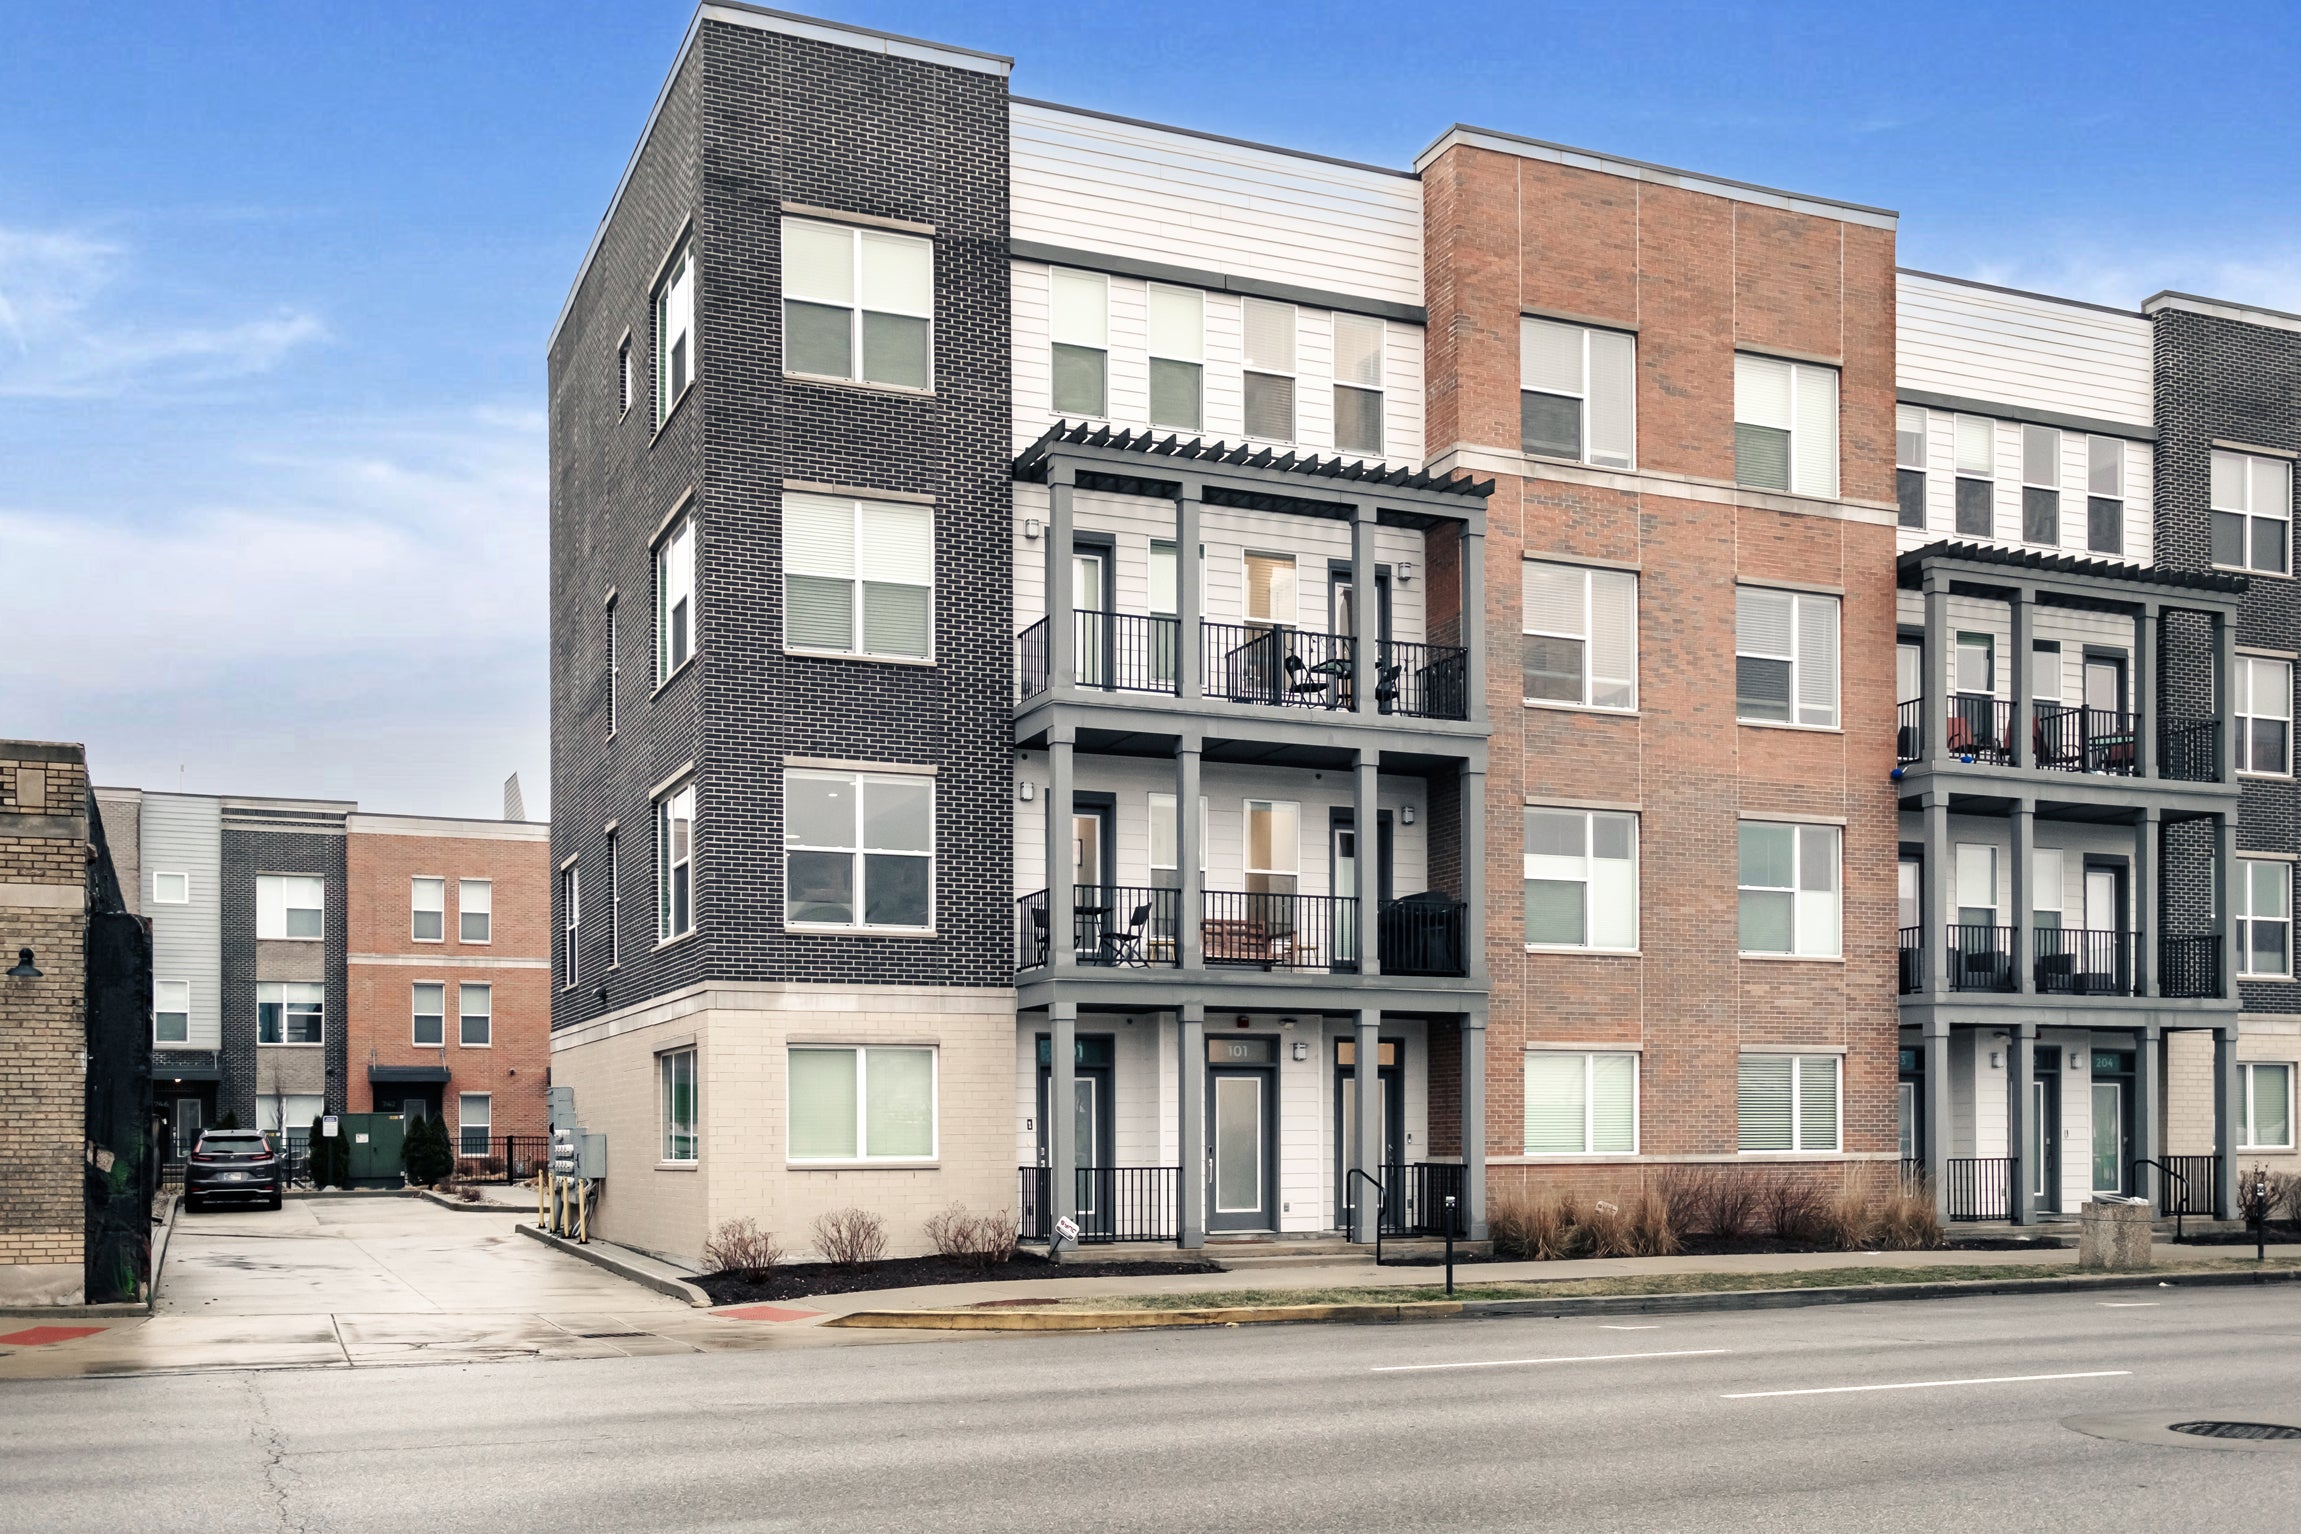 Photo of 727 N Illinois Street Unit 202 Indianapolis, IN 46204